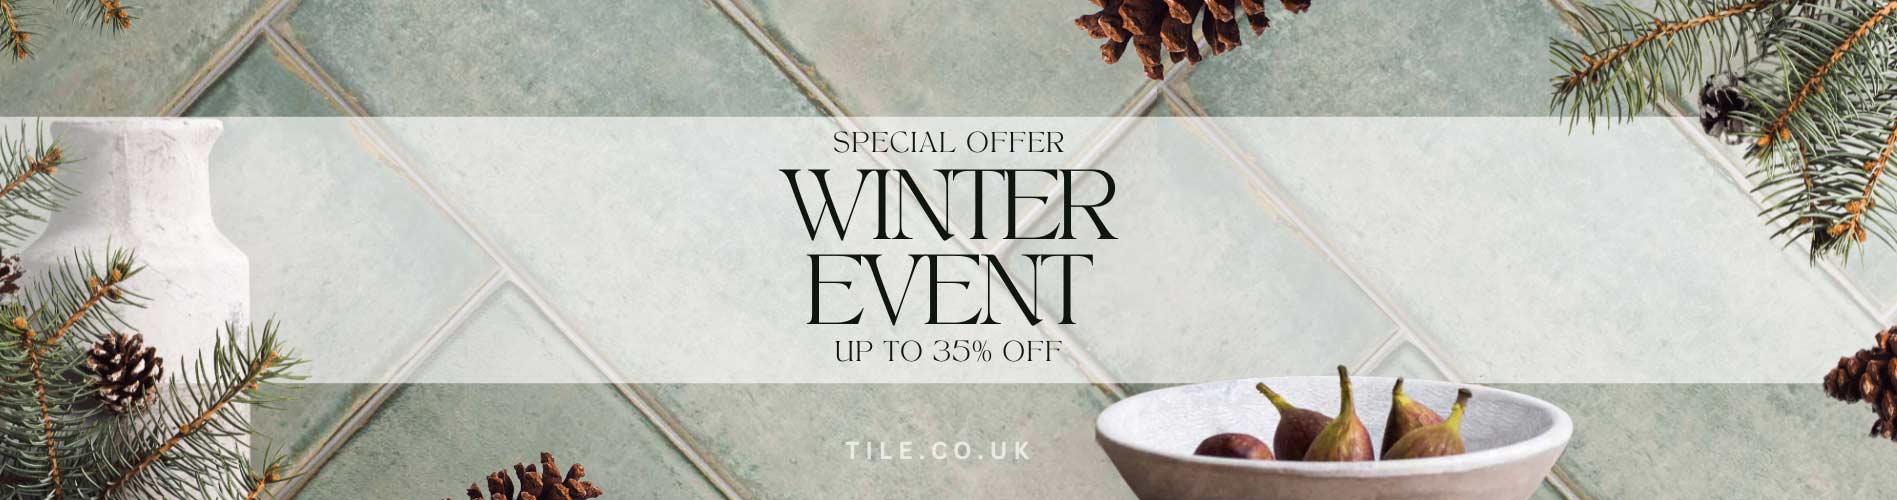 tile.co.uk winter sale with up to 35% off tiles